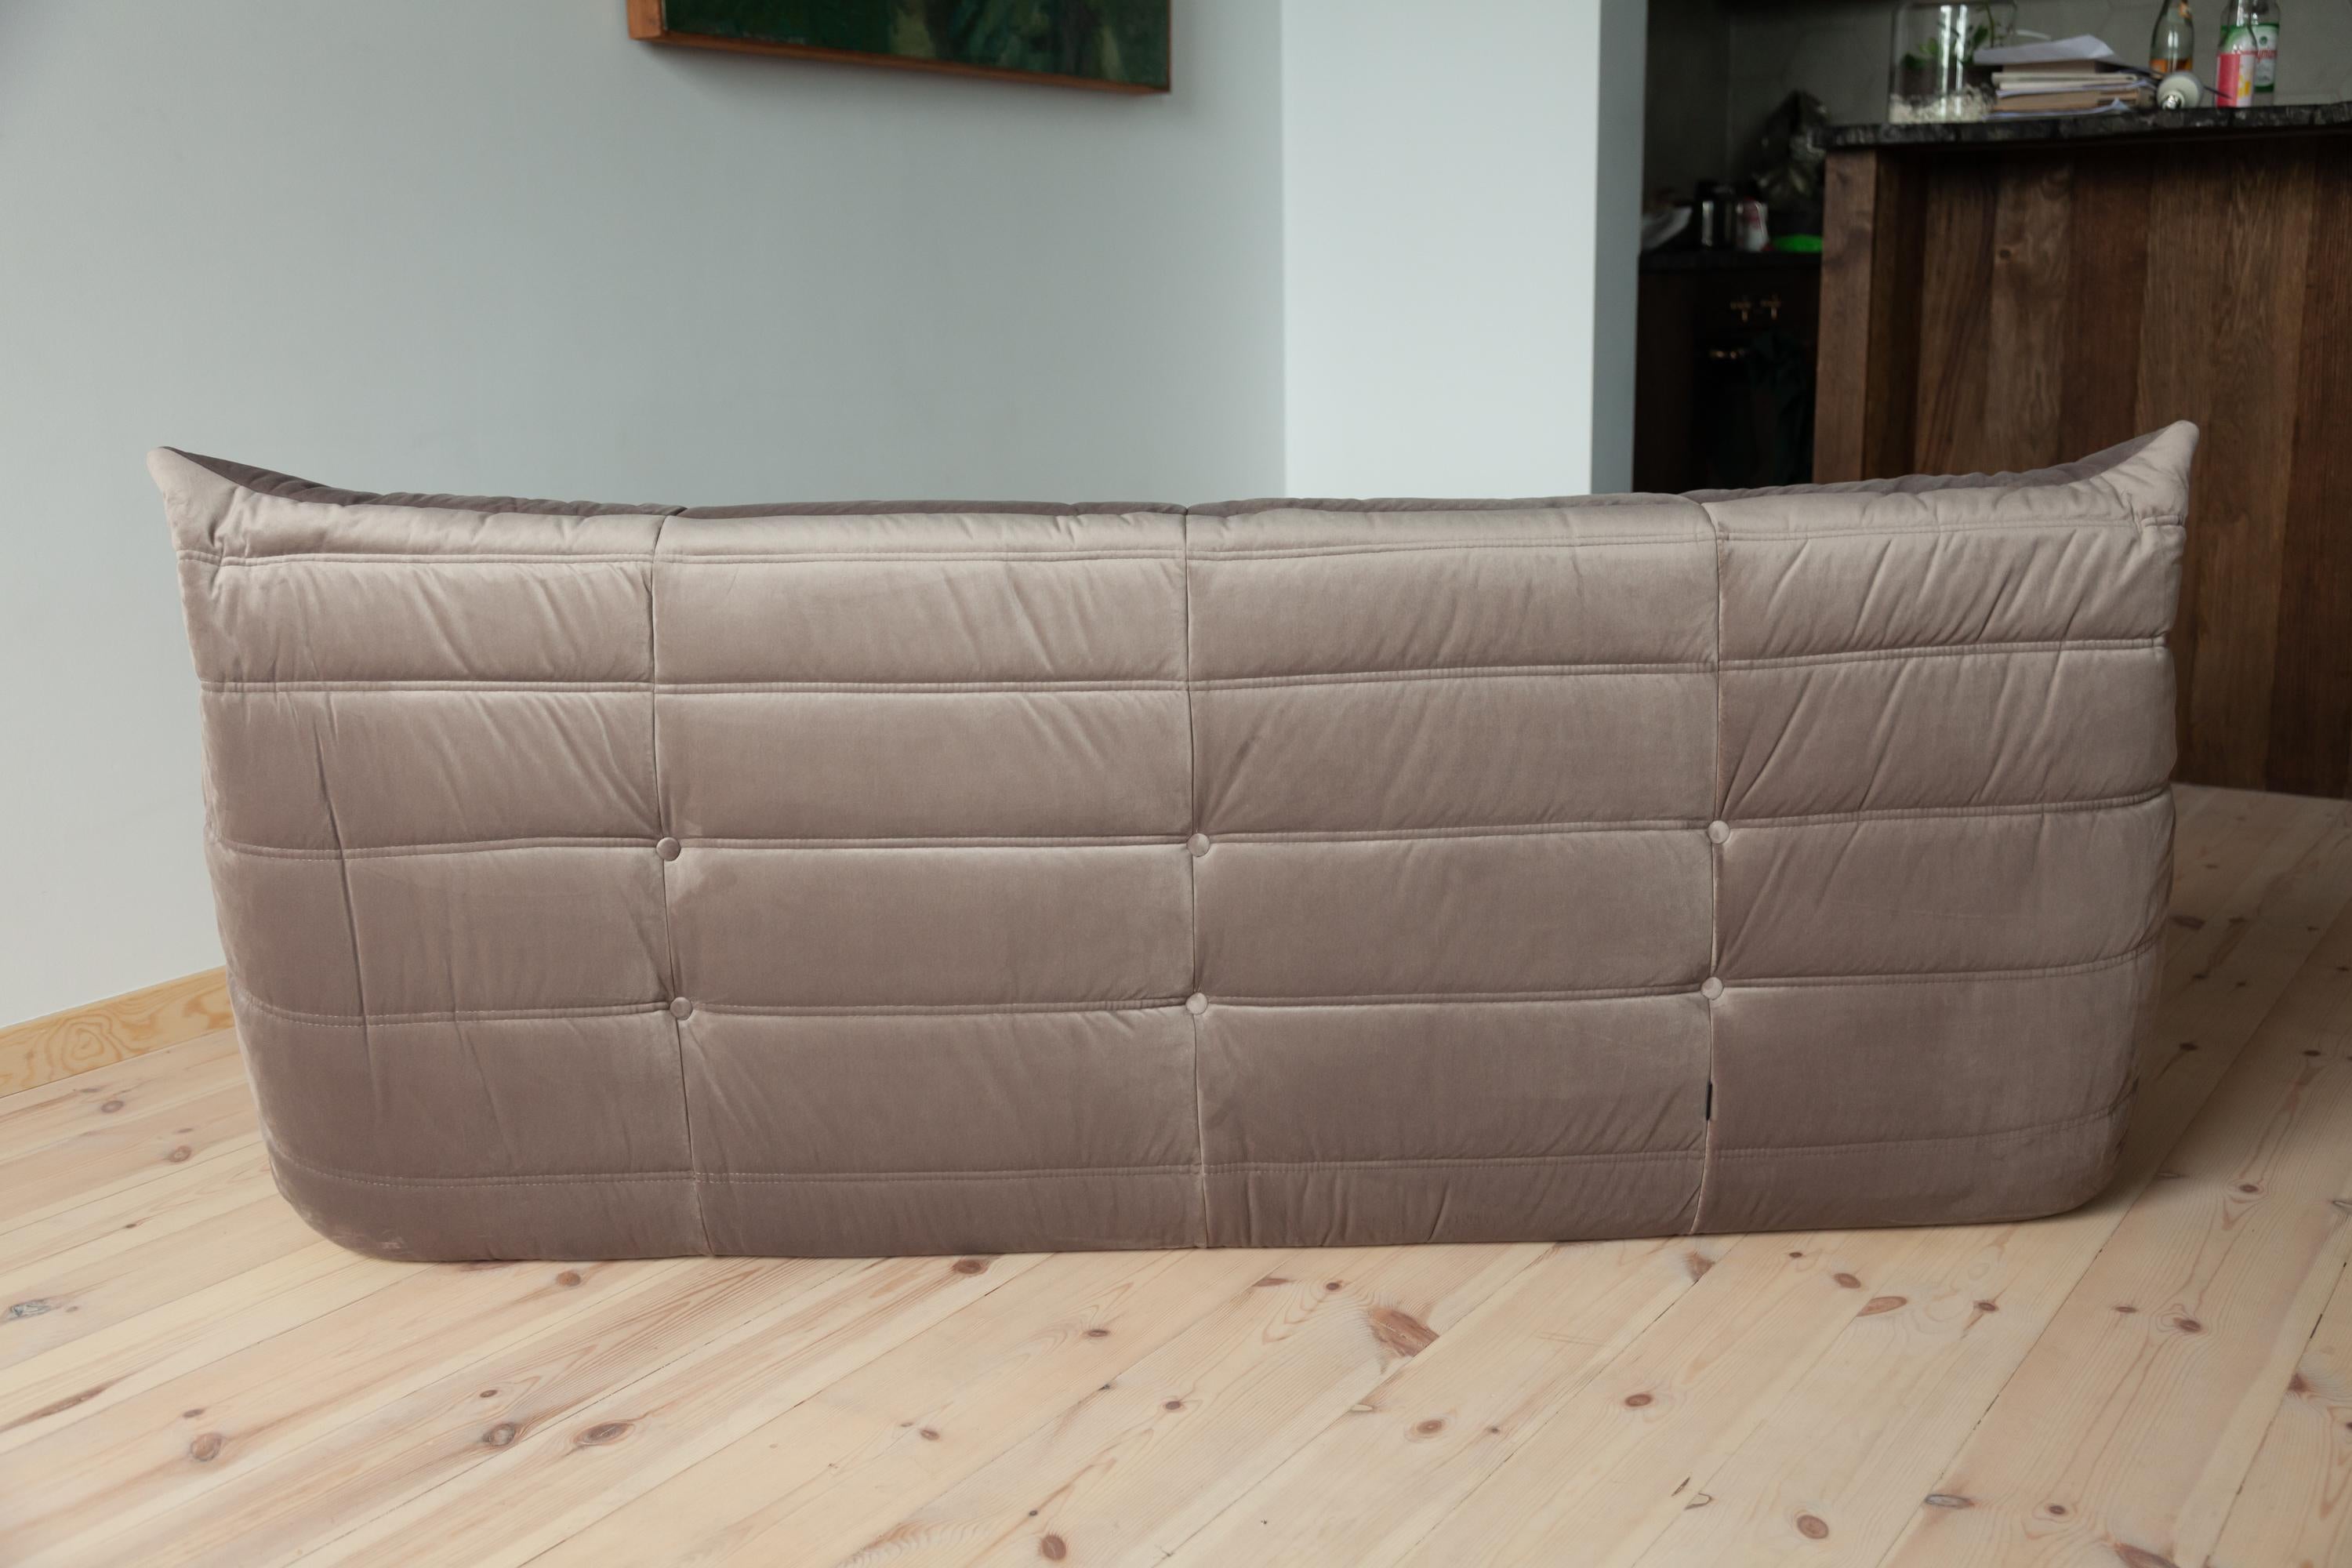 Togo 3-Seat Sofa in Pinkish Grey Velvet by Michel Ducaroy for Ligne Roset In Excellent Condition For Sale In Berlin, DE